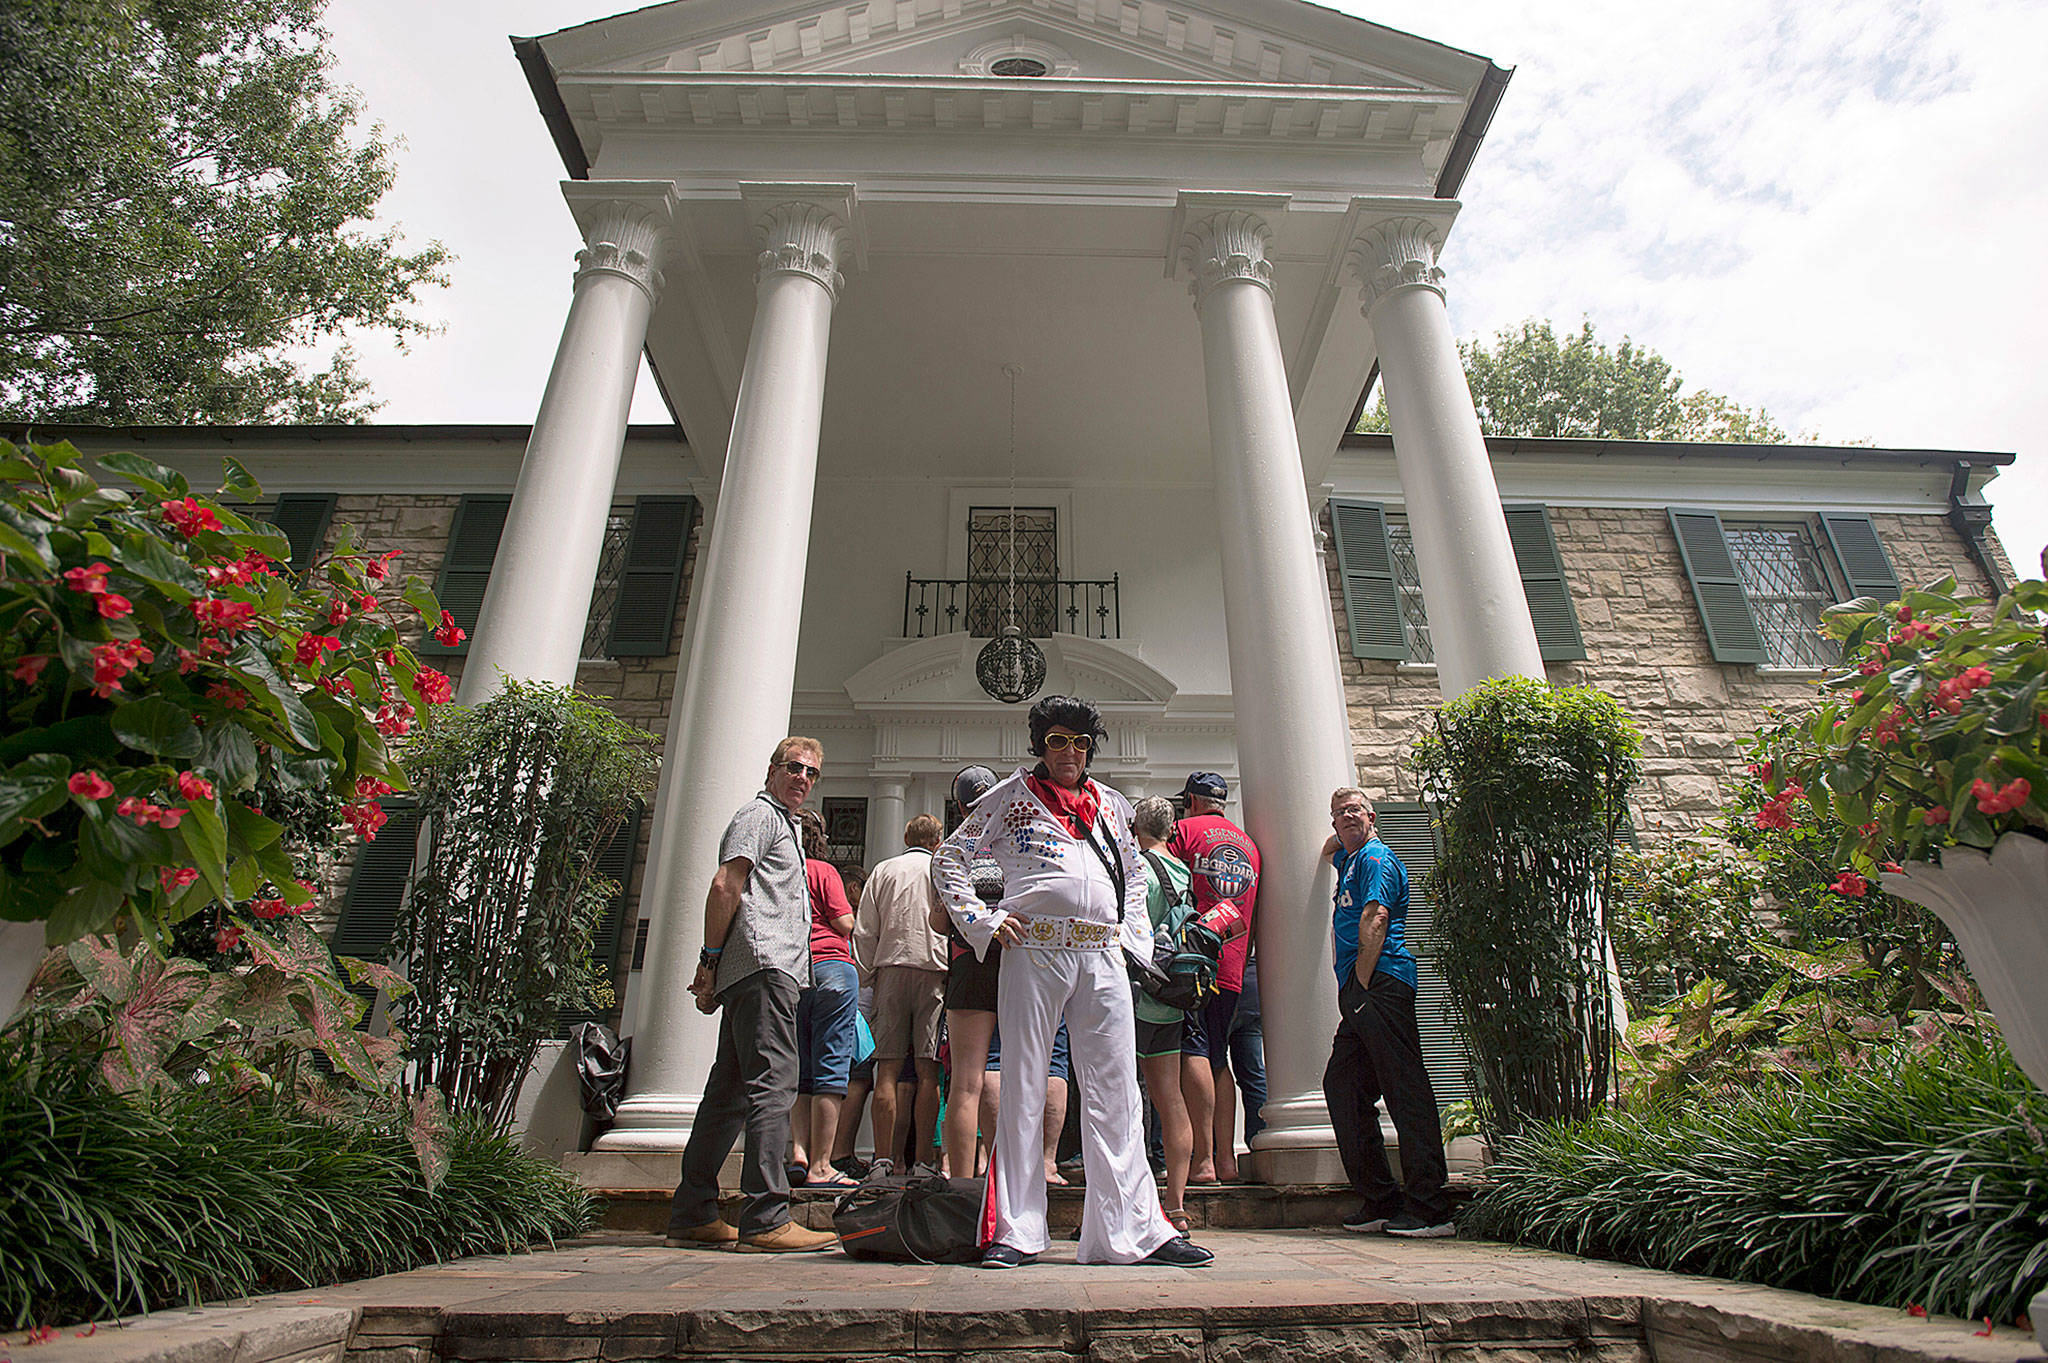 Bryan Glencross of Glasgow, Scotland, strikes a pose in his Elvis-inspired outfit while waiting to begin a tour of Graceland on Tuesday in Memphis, Tennessee. (AP Photo/Brandon Dill)